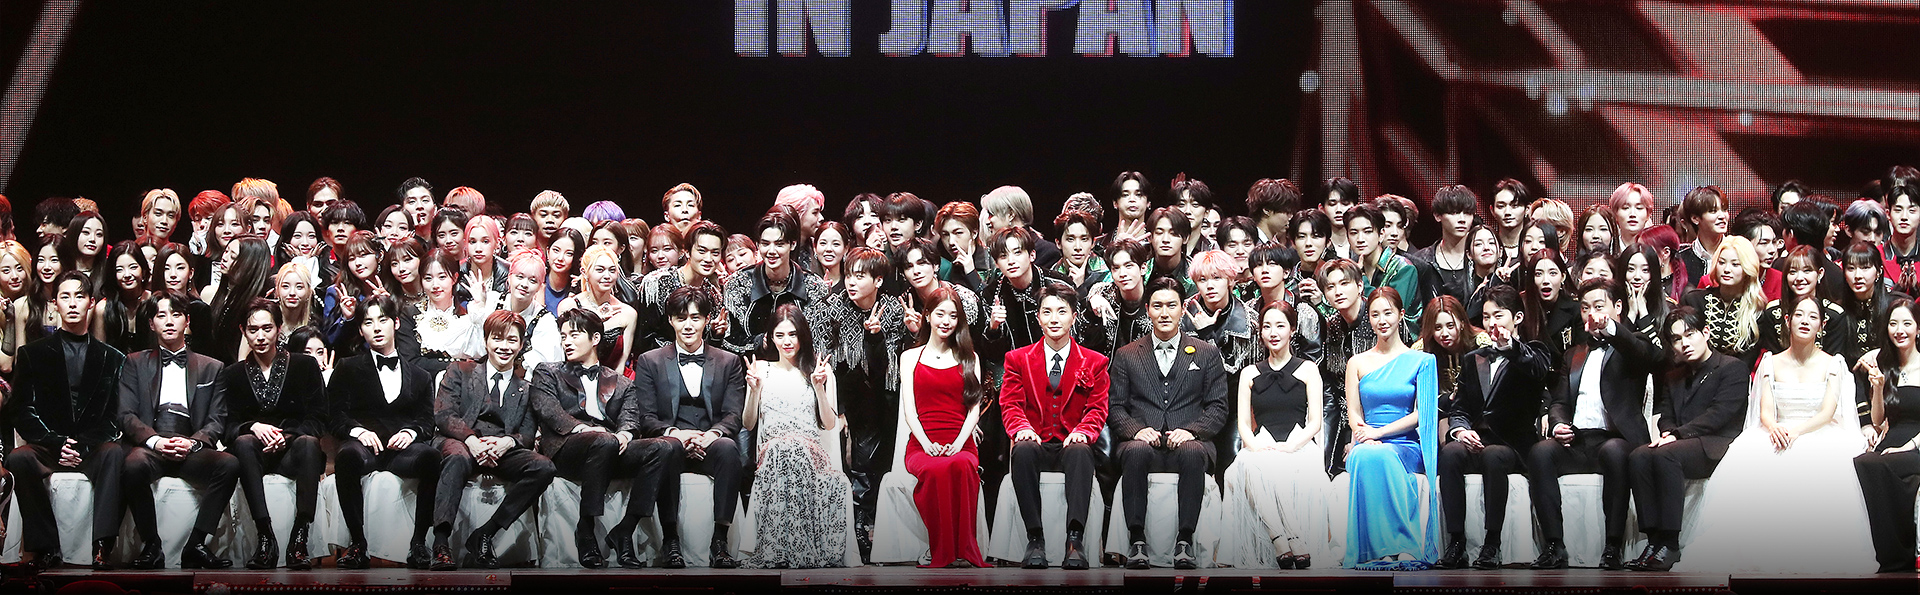 Attendees at the 2022 edition of the Asia Artist Awards in Nagoya, Japan